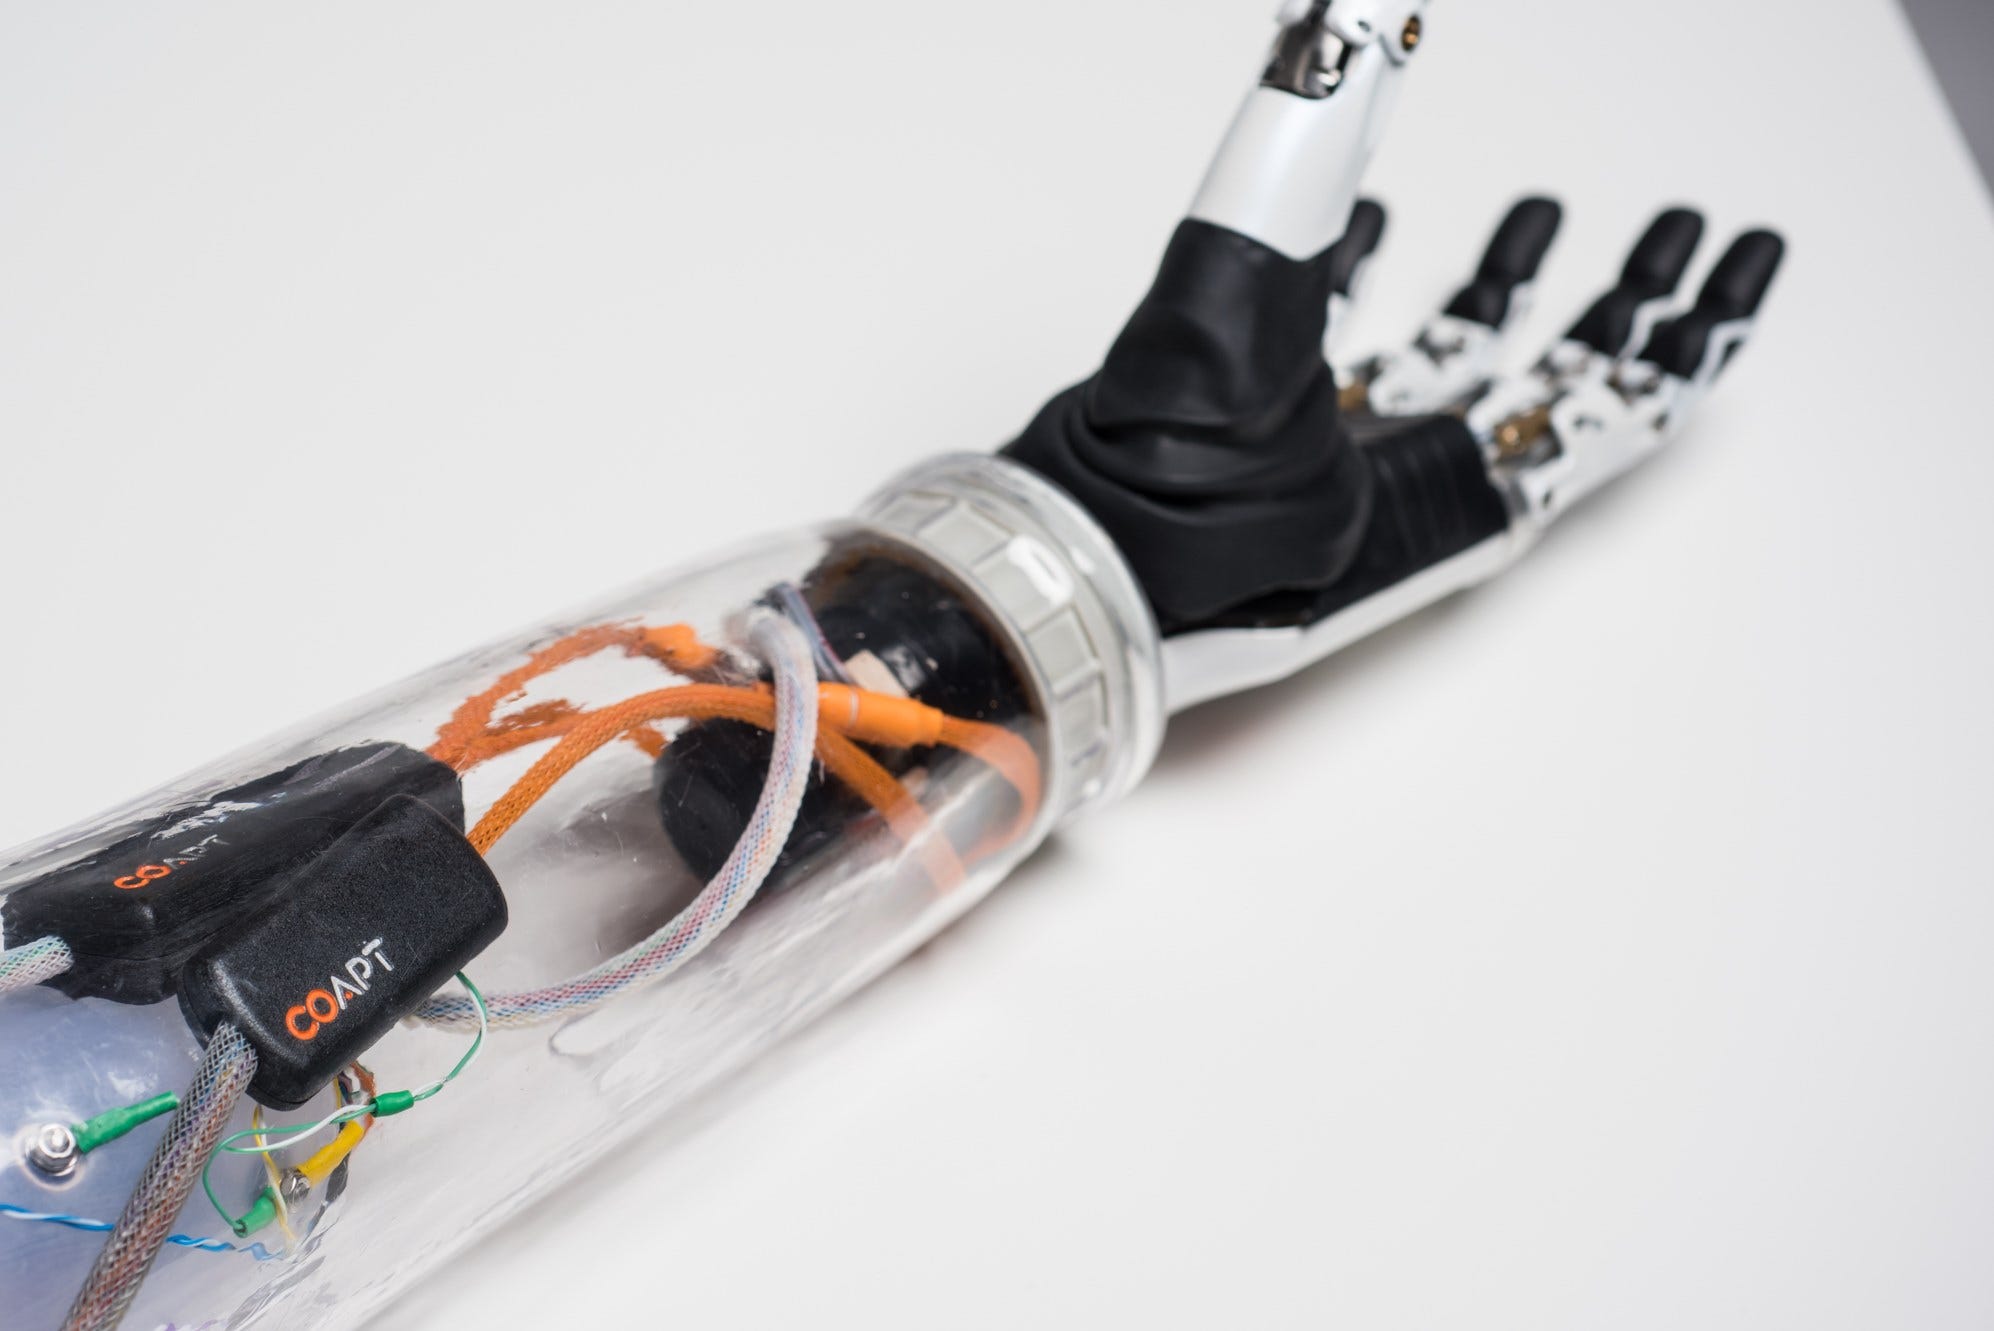 Company Purchases Purdue Technology to Revolutionize Bionic Limbs